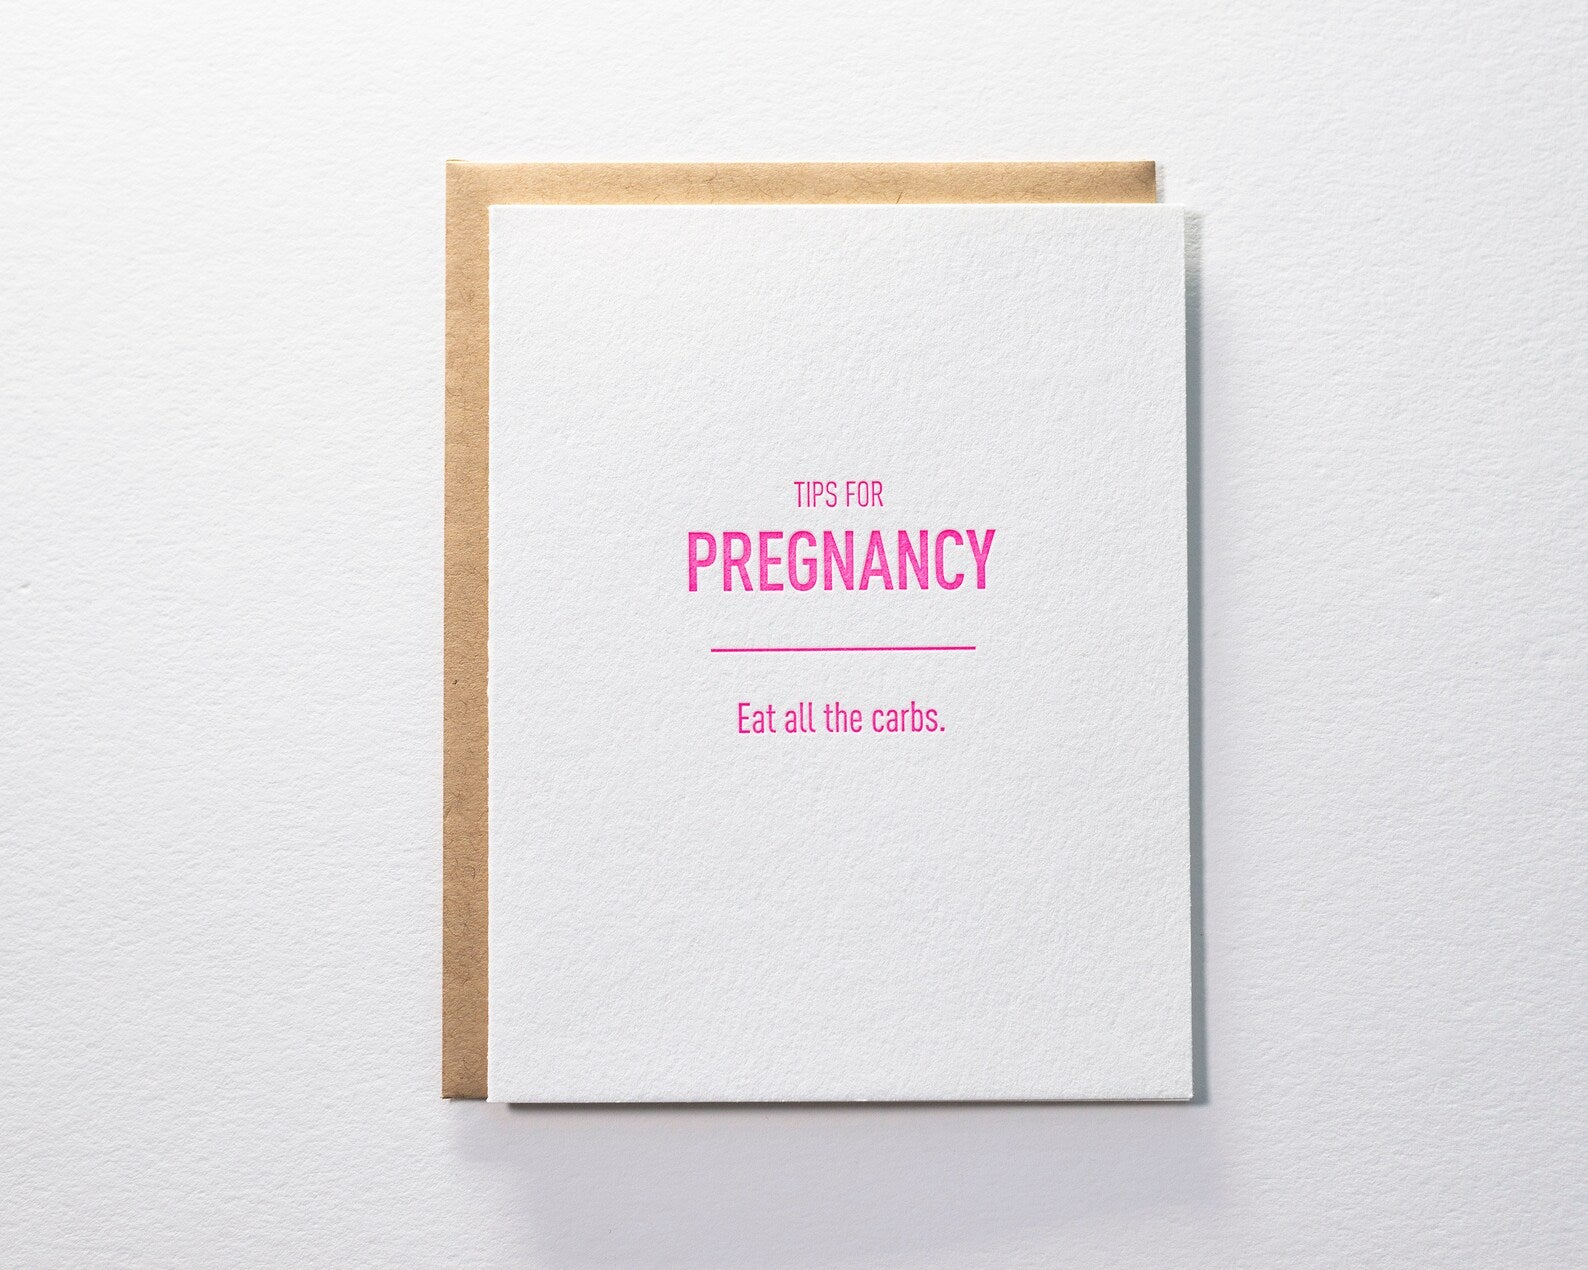 Tips for Pregnancy: Eat all the carbs - Letterpress Card